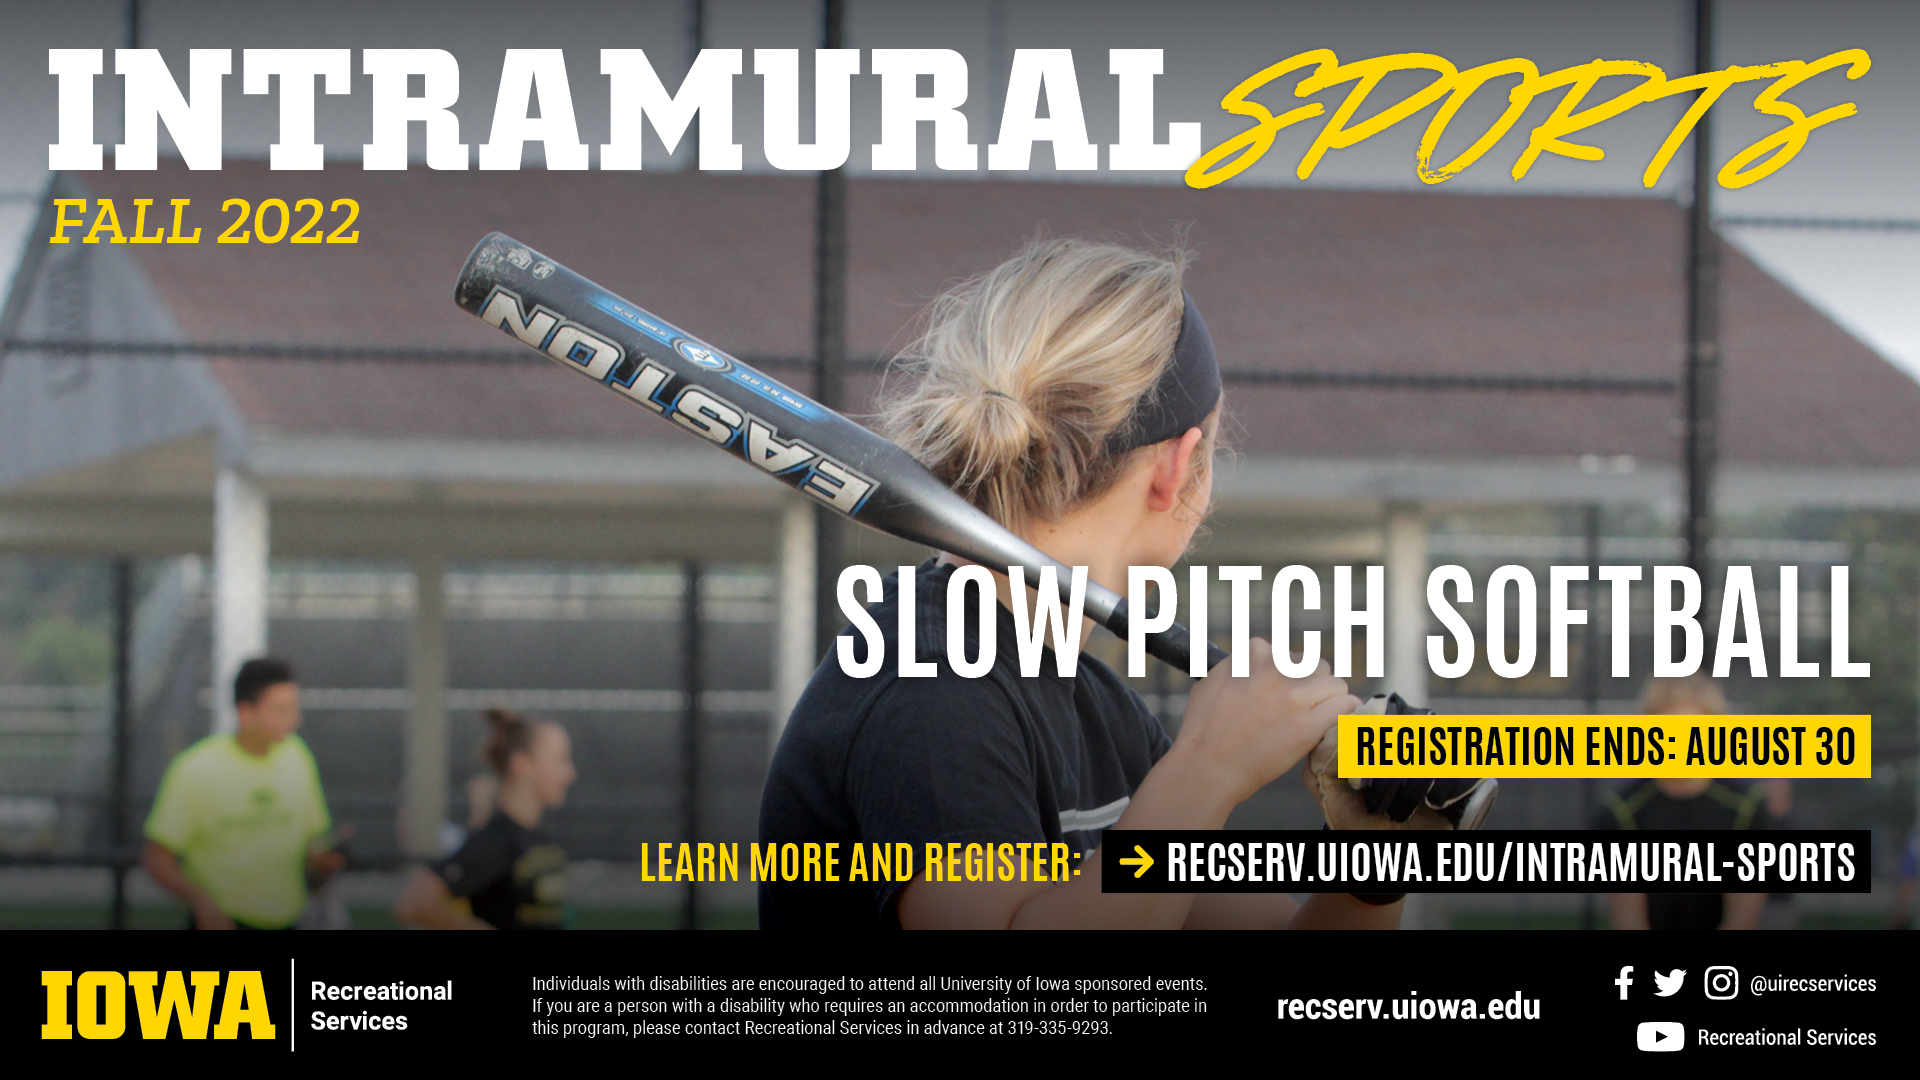 Intramural Sports Fall 2022: Slow-Pitch Softball. Learn more and register at reserv.uiowa.edu/intramural-sports